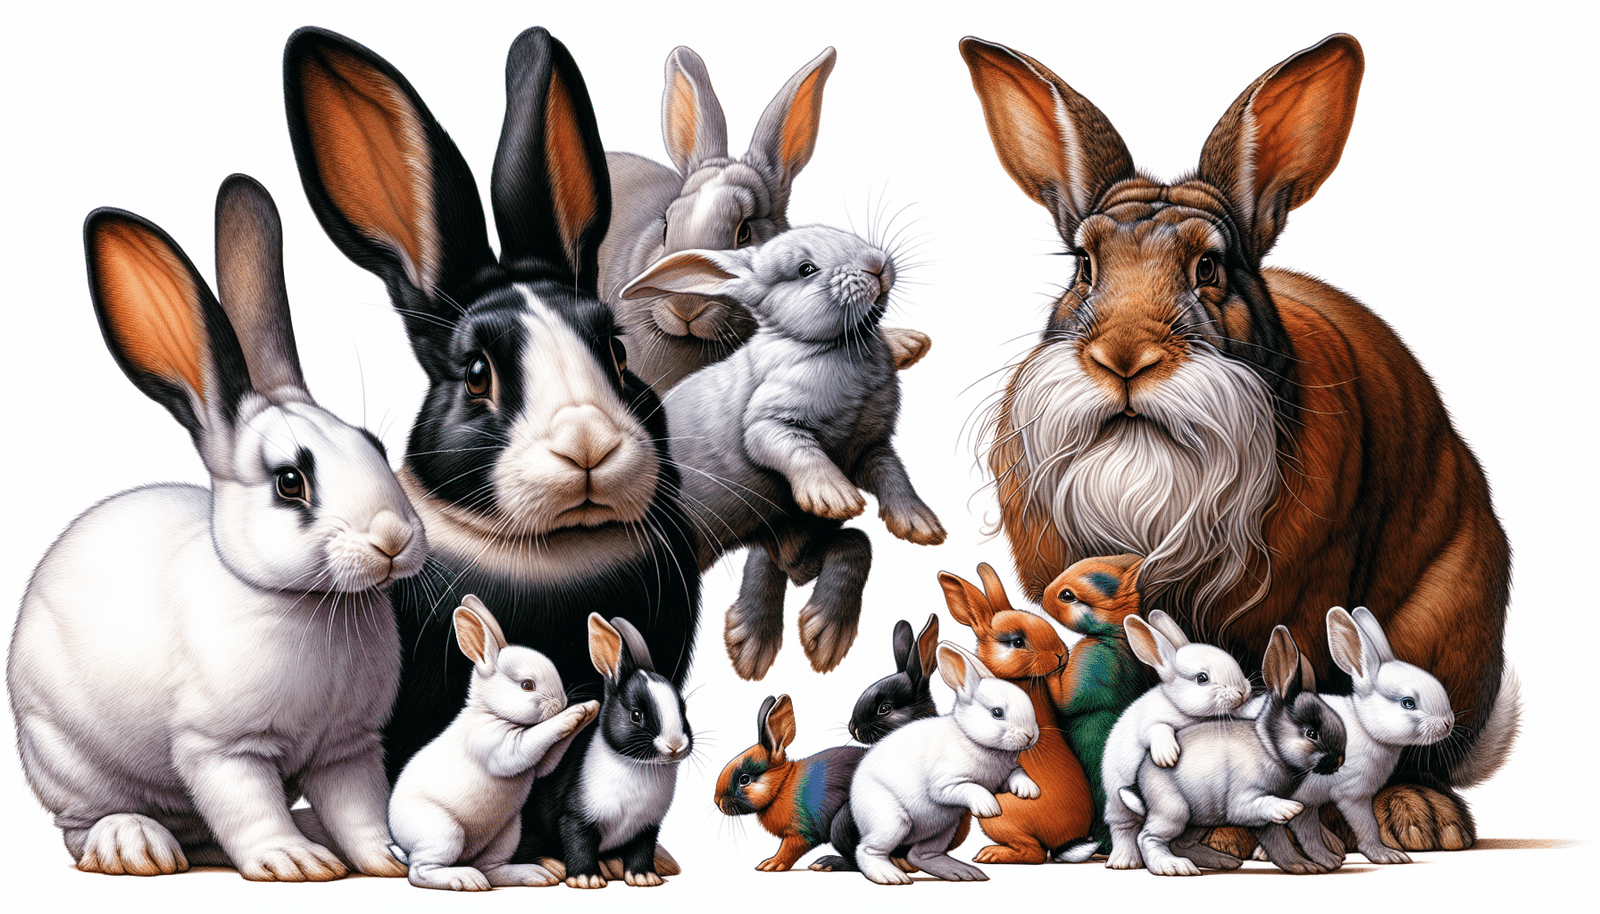 Illustration of a group of happy rabbits